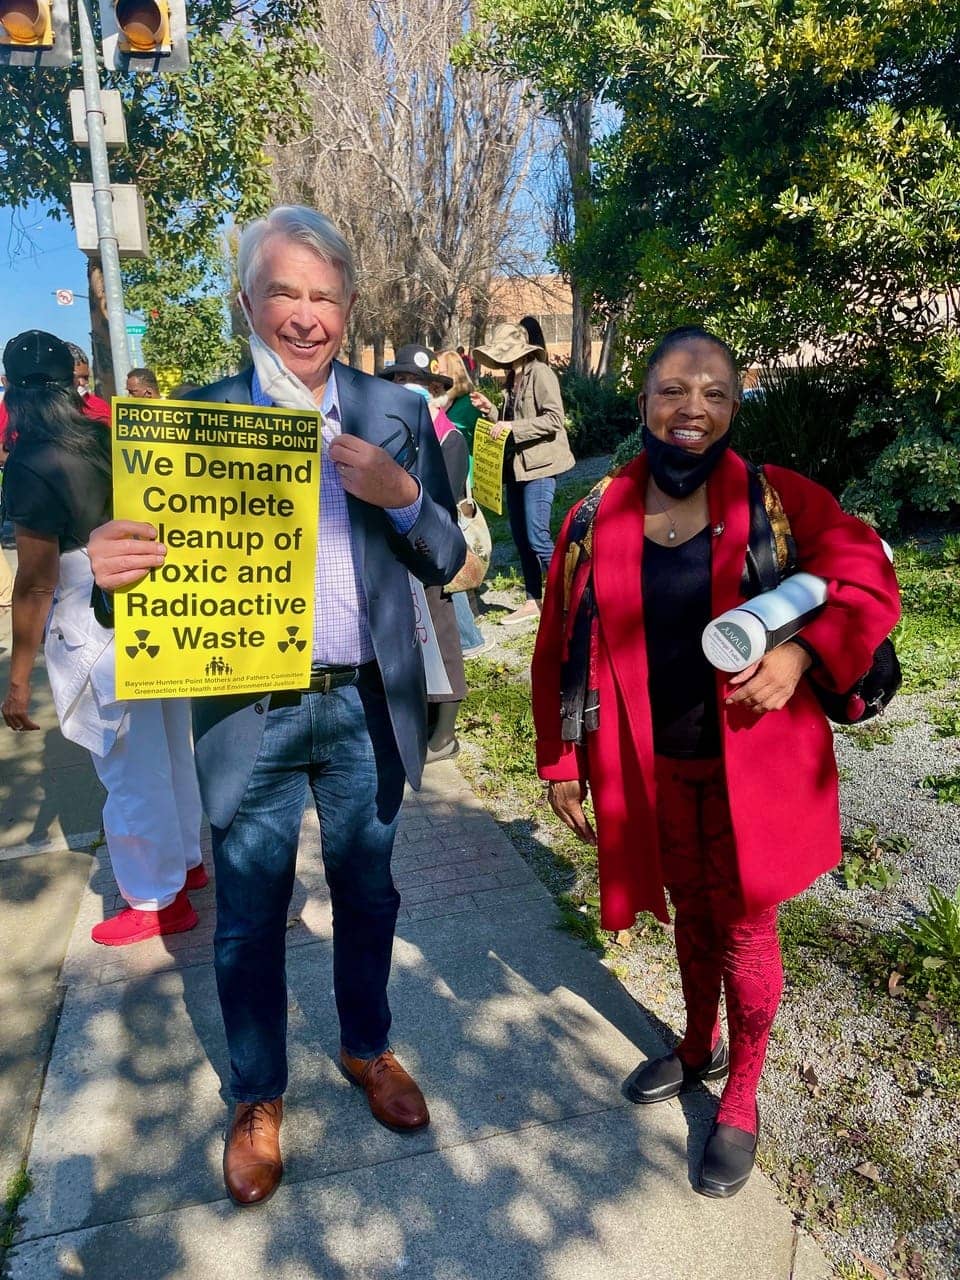 UCSF-alumni-Dr.-James-Dahlgren-and-Dr.-Ahimsa-at-rally-to-clean-up-shipyard-021222-1, HP Biomonitoring: Promising HOPE for Hunters Point, News & Views 